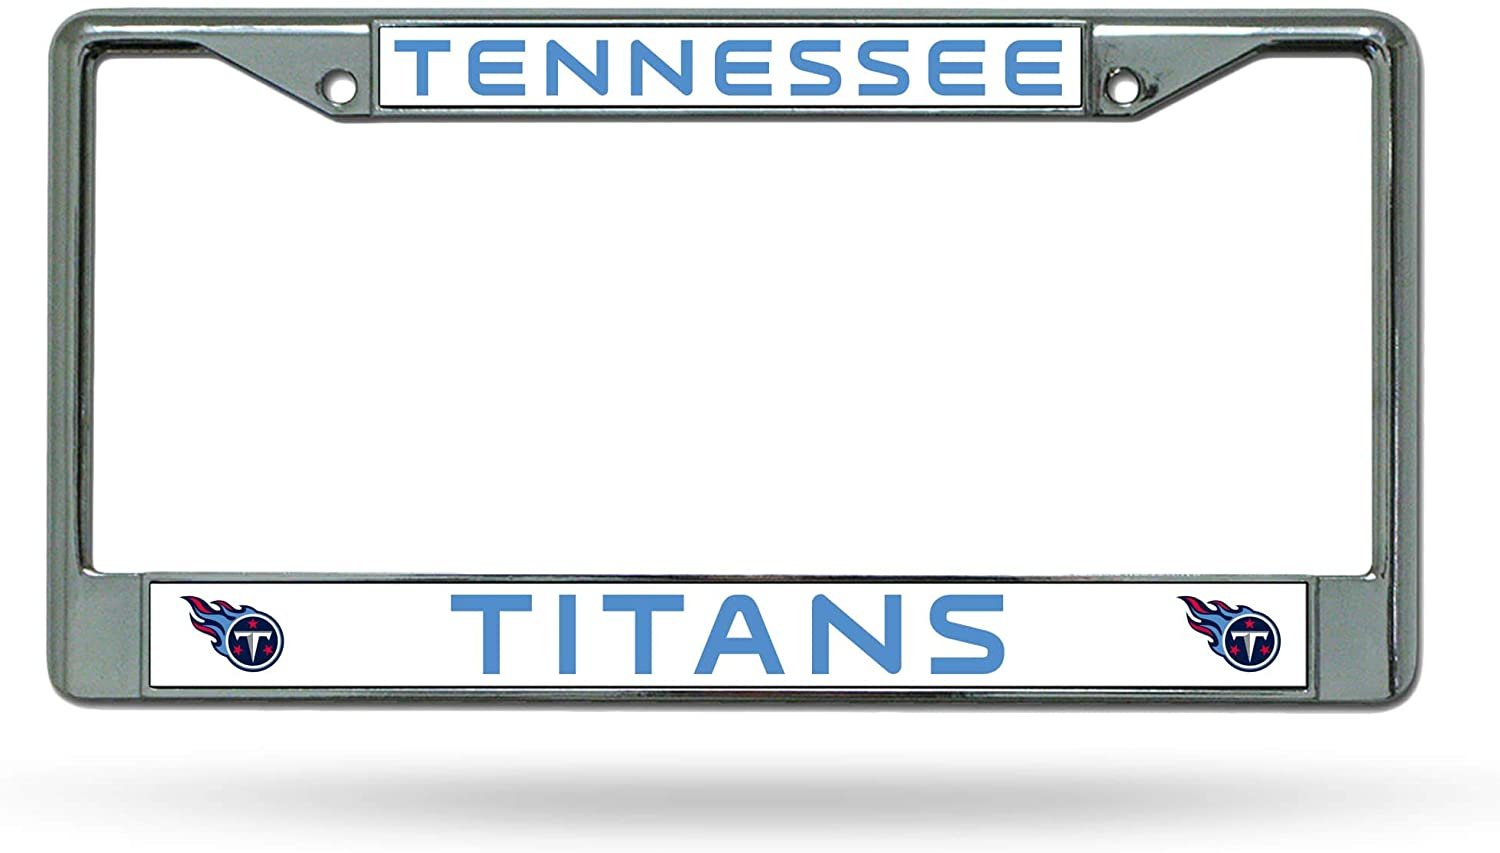 Tennessee Titans Premium Metal License Plate Frame Chrome Tag Cover, 12x6 Inch